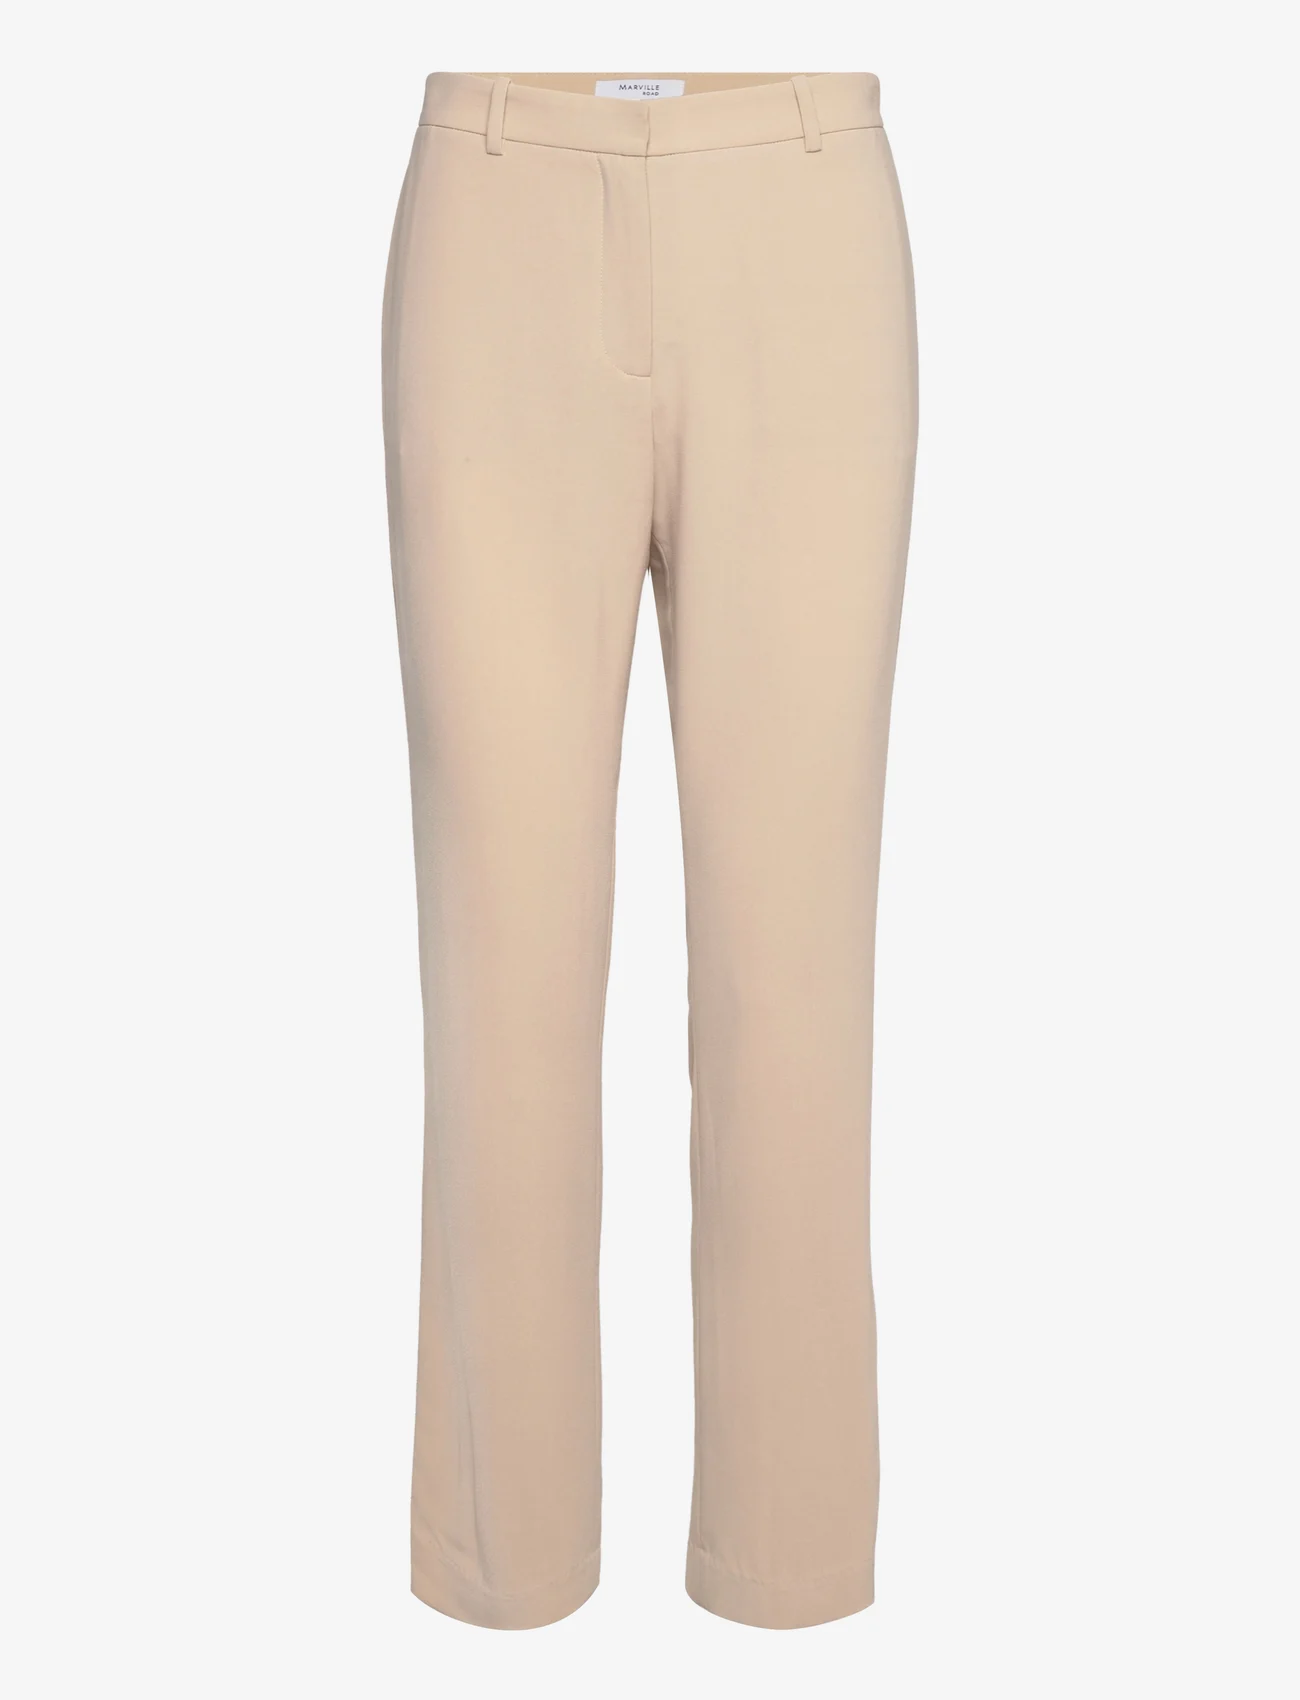 Marville Road - Christie Stretch Crepe Trousers - beige - 0